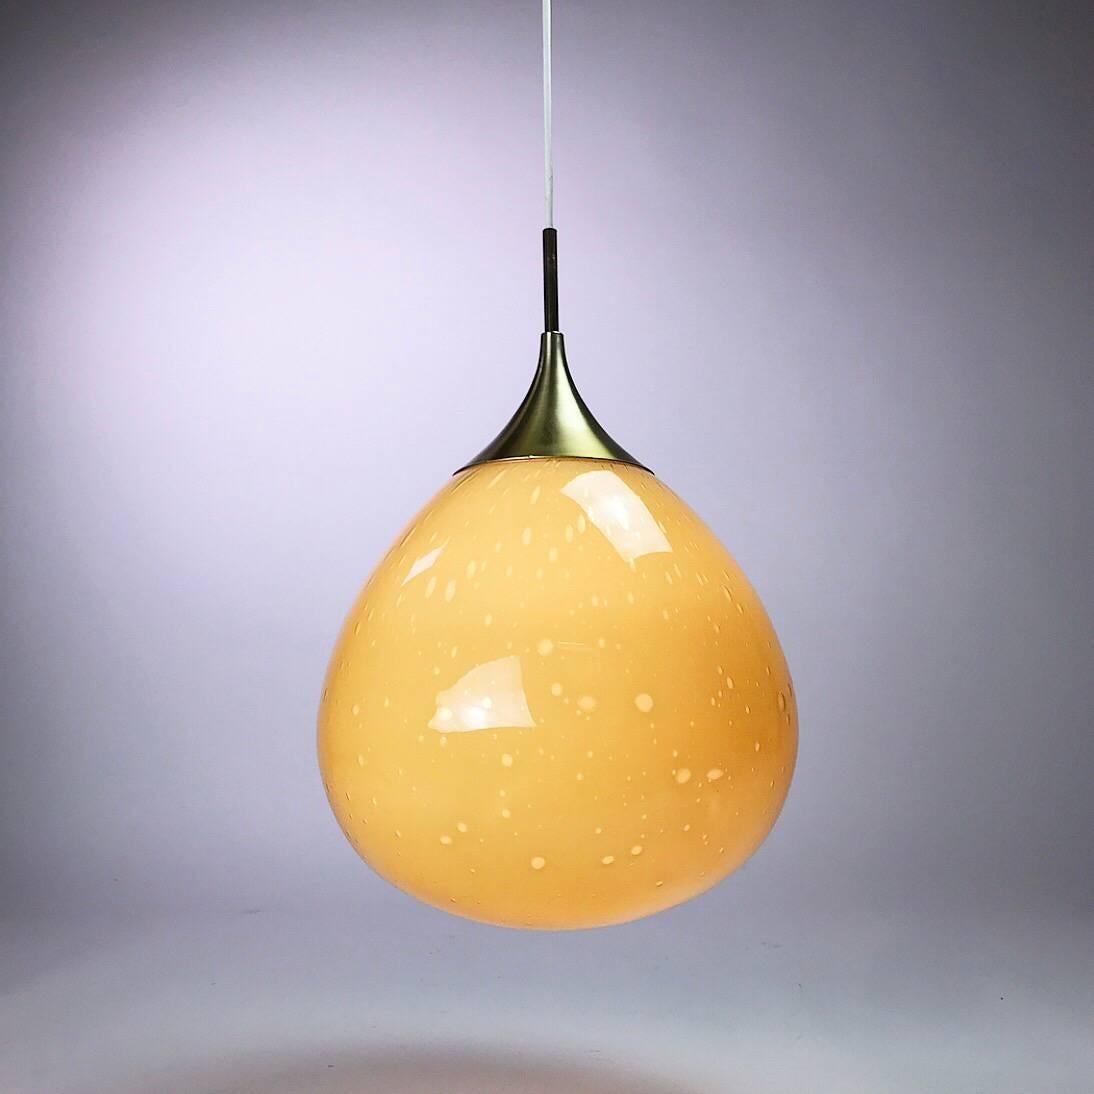 Amazing and classic Doria Leuchten Germany ceiling light from 1960s. 

Doria Leuchten is world known for it’s beautiful handcrafted glass pendants. 

This rare teardrop honey colored is made with two layers of glass to give it the bubble effect.